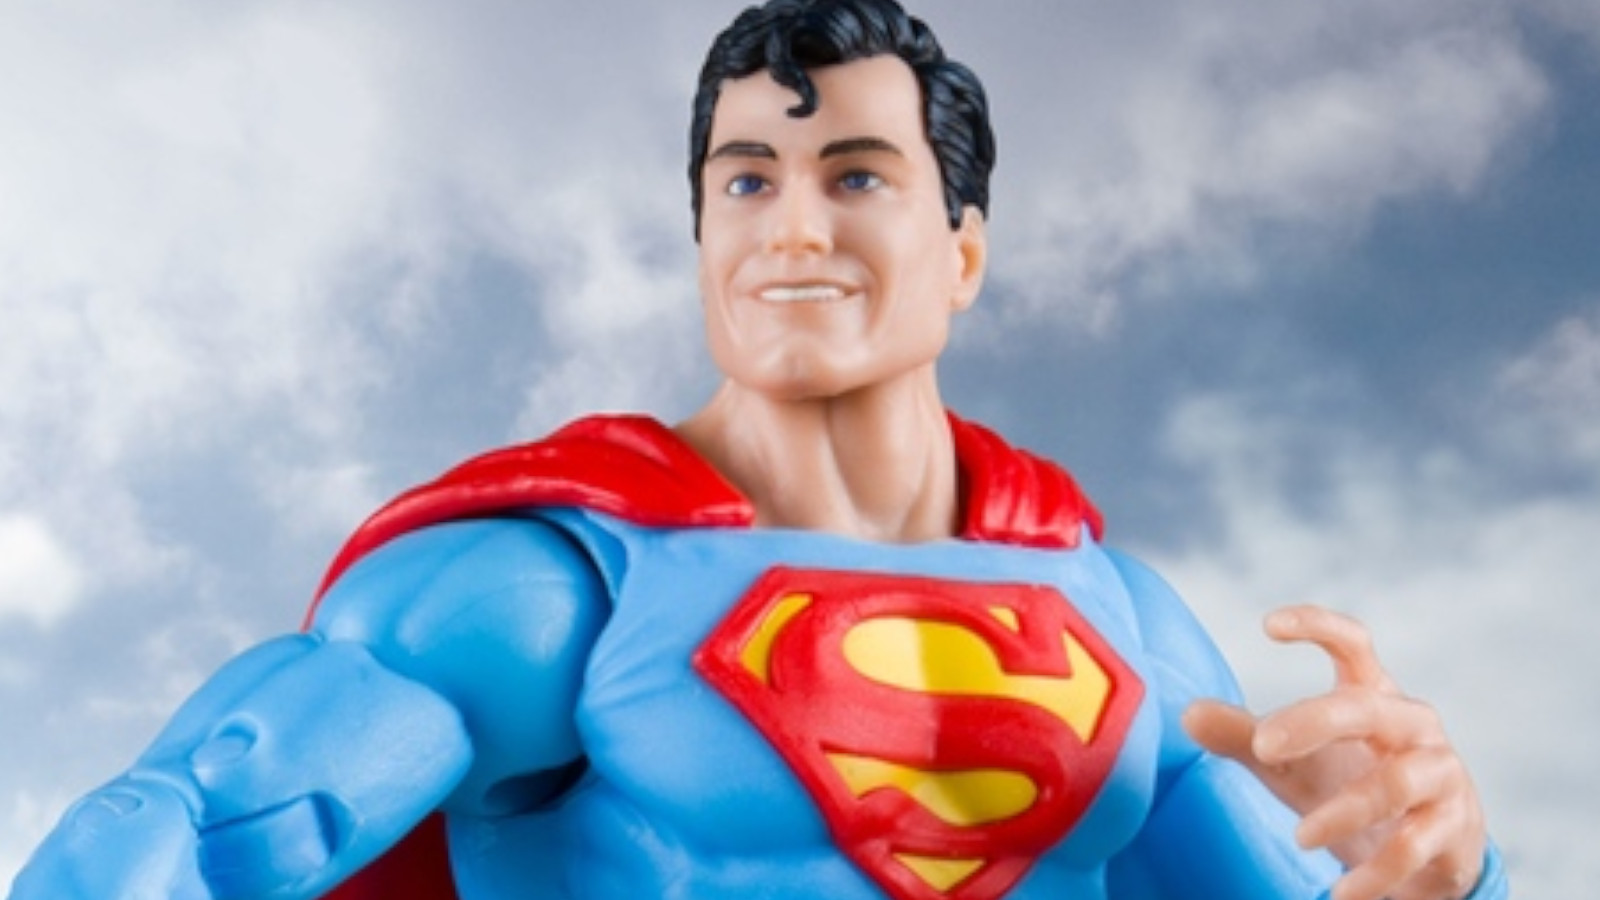 DC Direct Classic Animation Limited Edition Superman Figurine